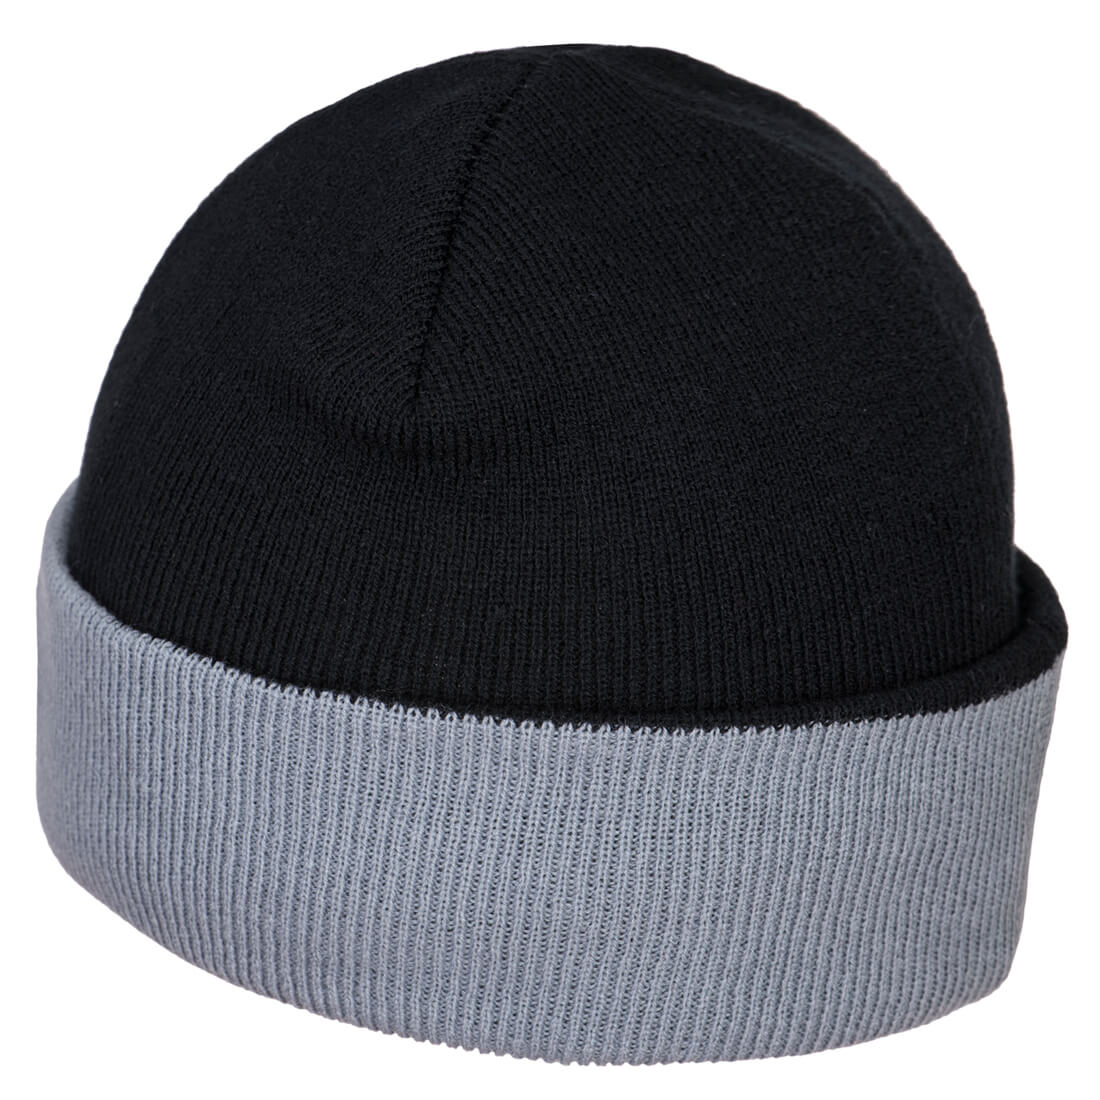 Two Tone LED Rechargeable Beanie Black/Grey